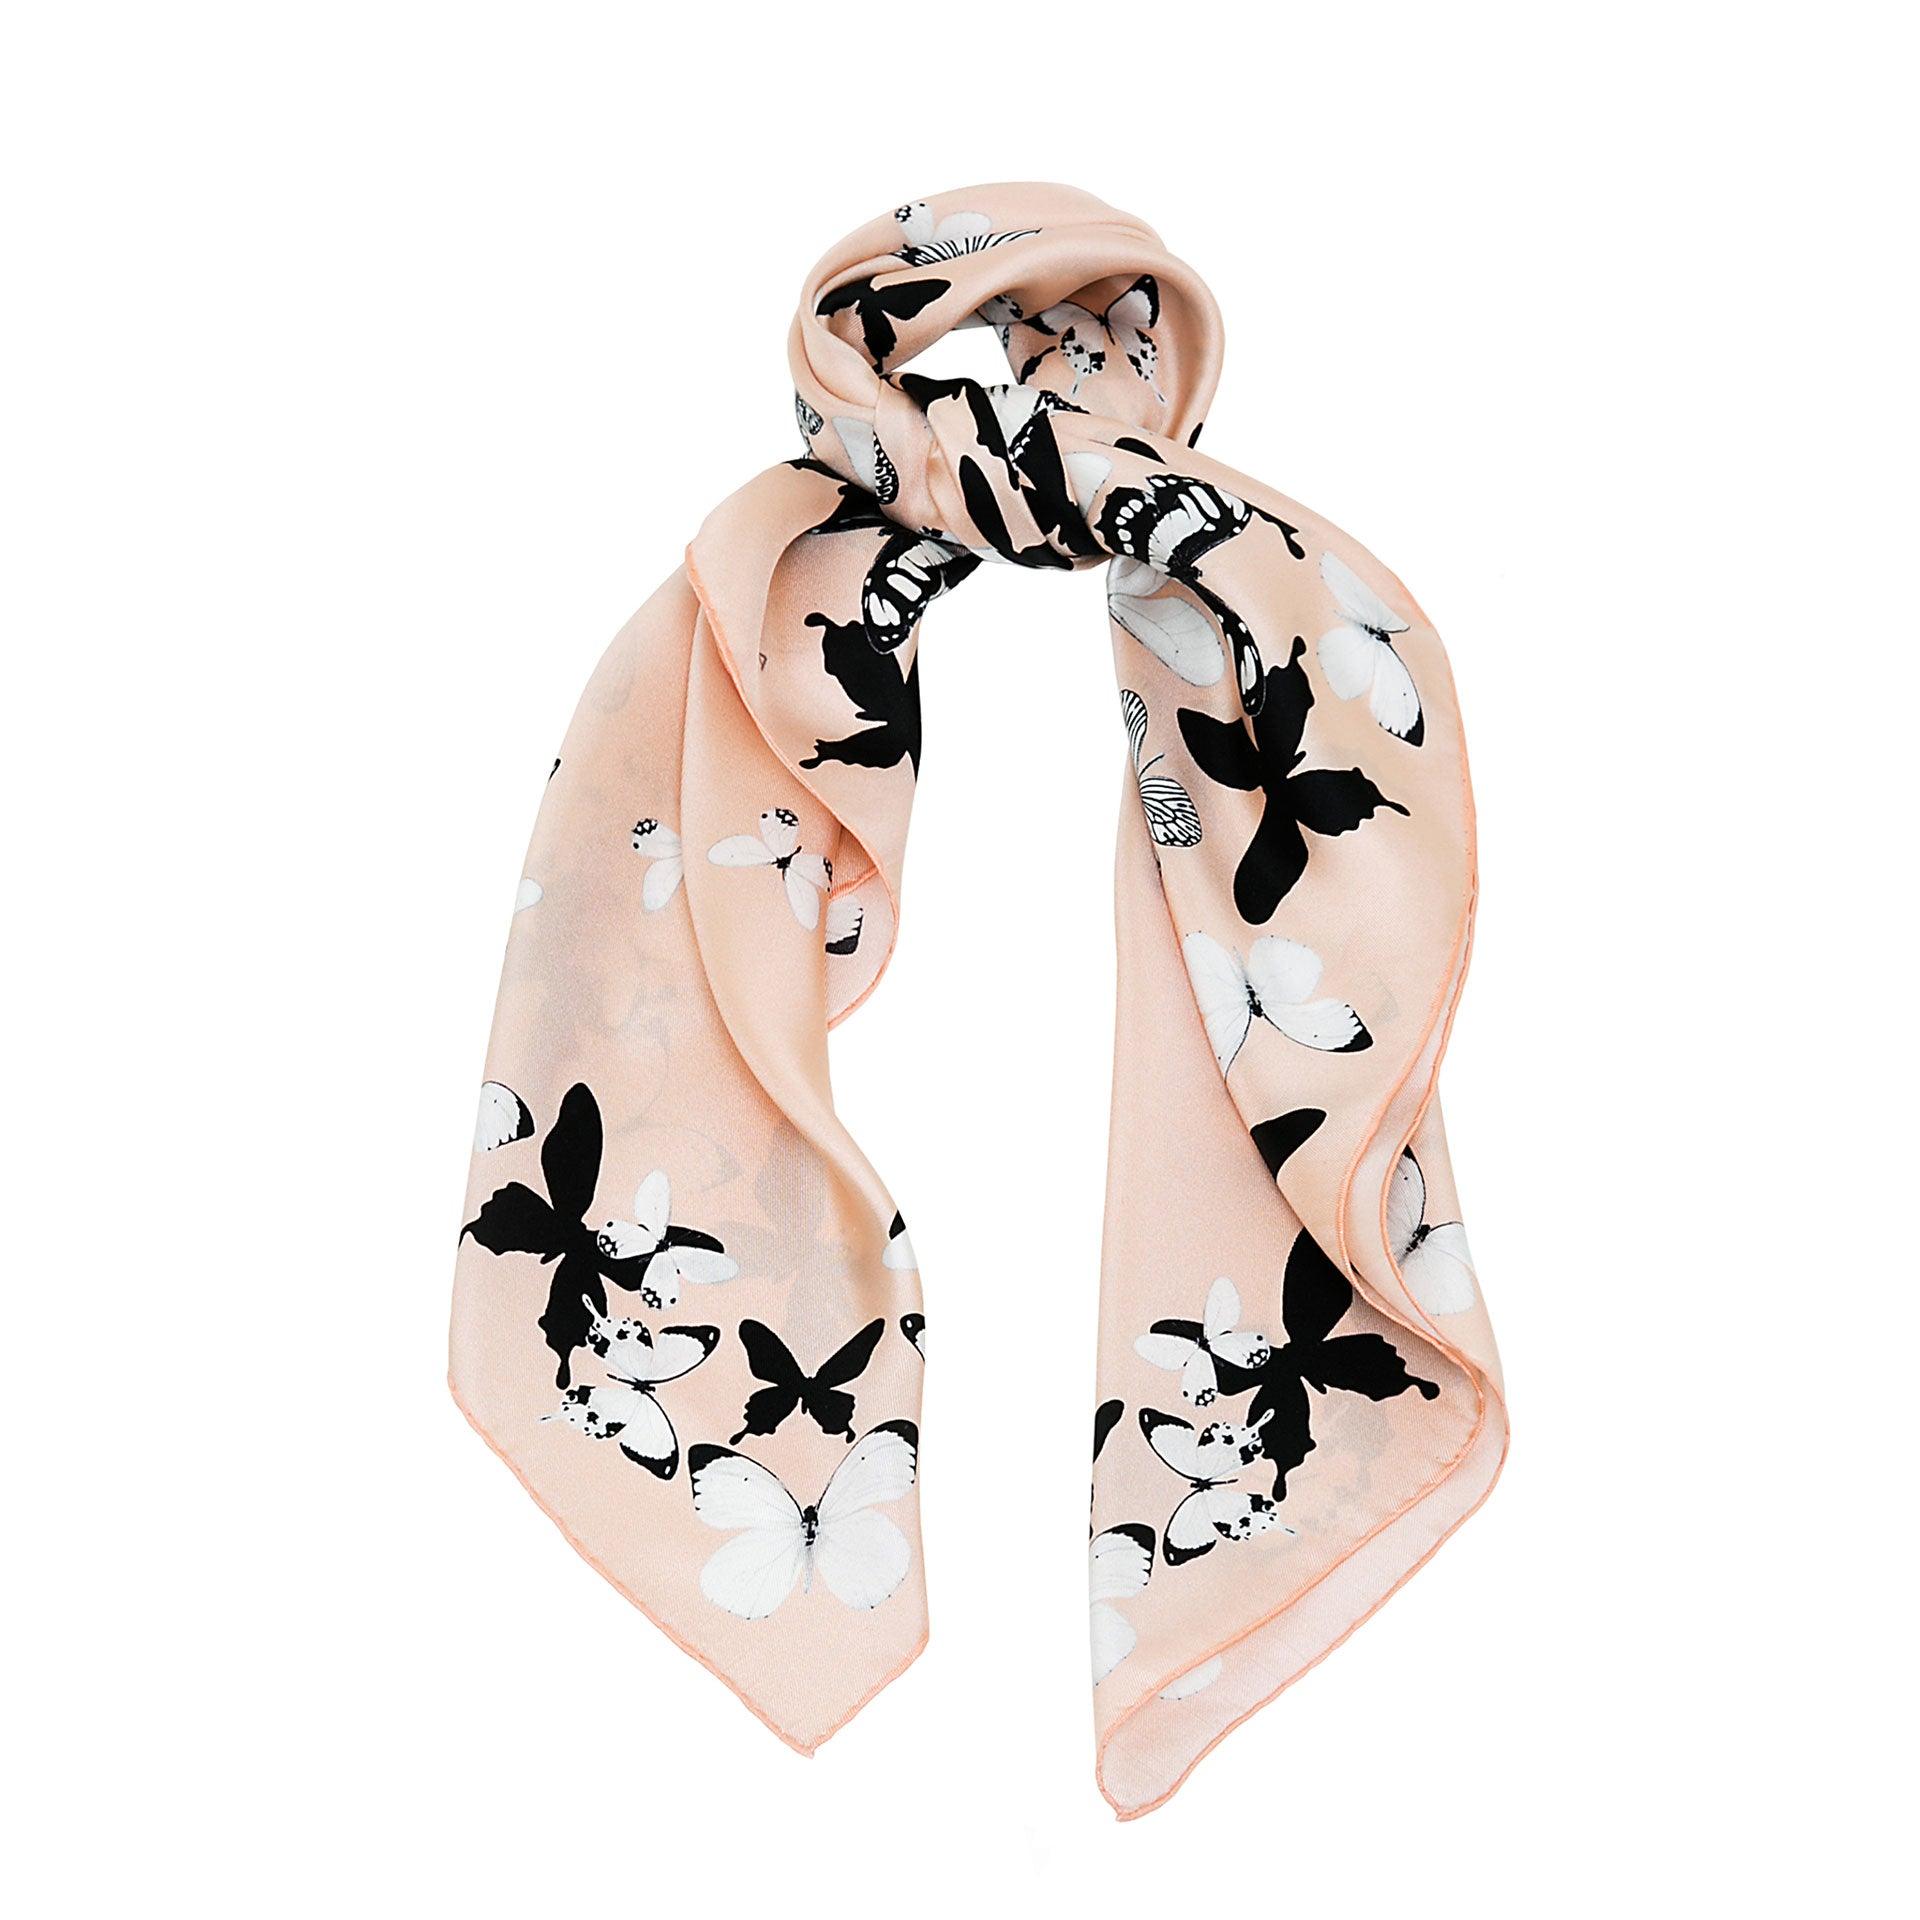 Coral Pink Butterflies Silk Scarf - A blend of London's design and Italian craftsmanship, a luxurious gift choice.